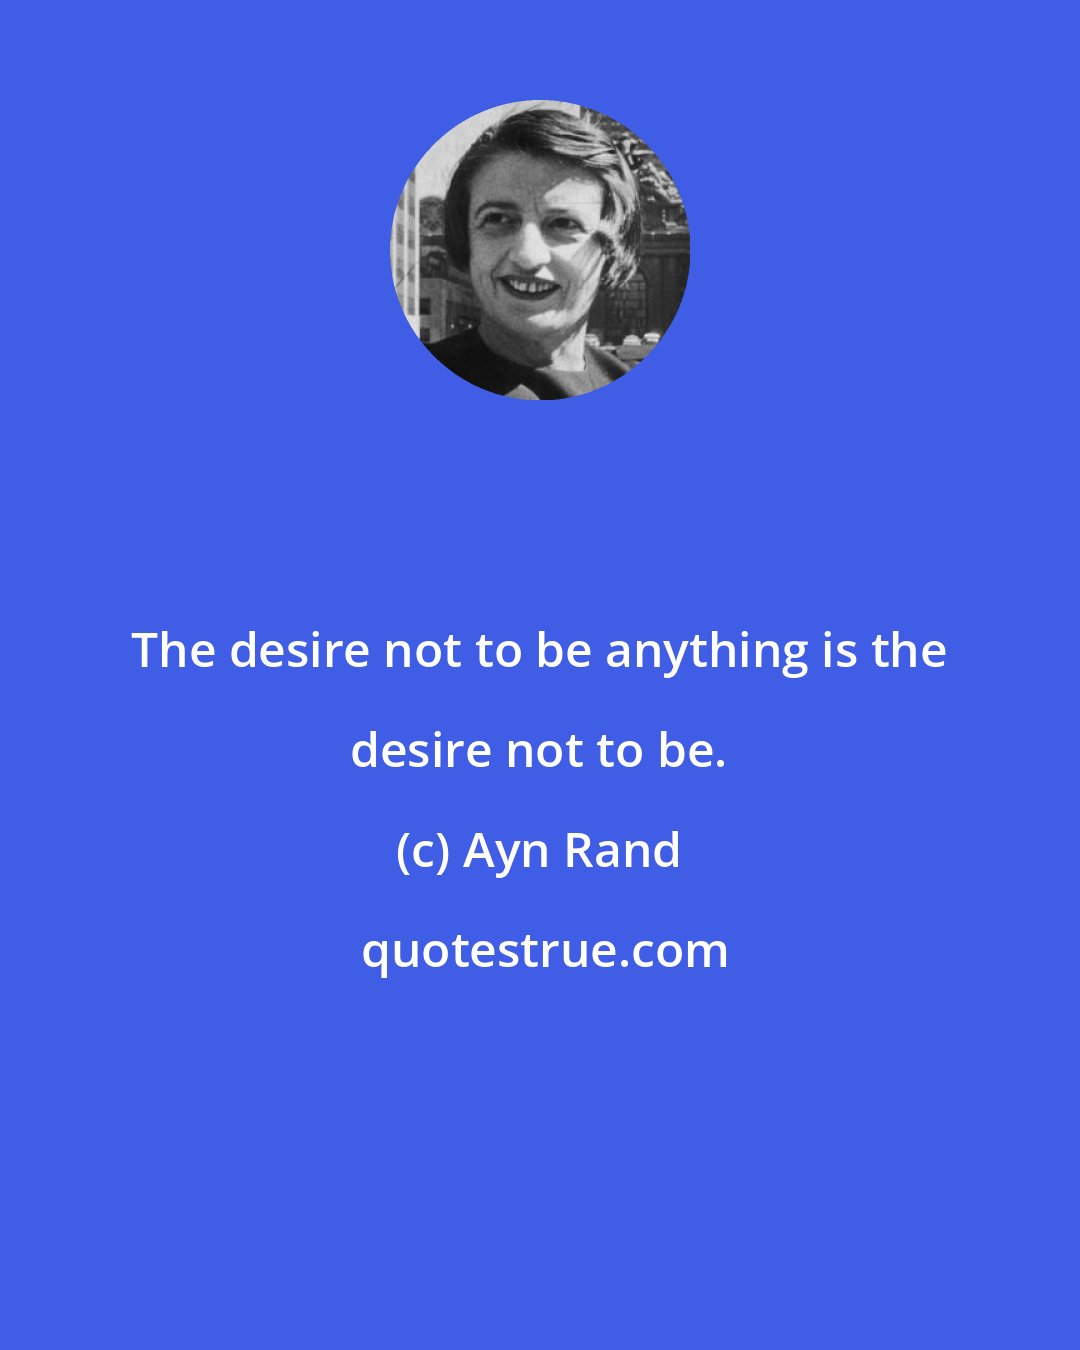 Ayn Rand: The desire not to be anything is the desire not to be.